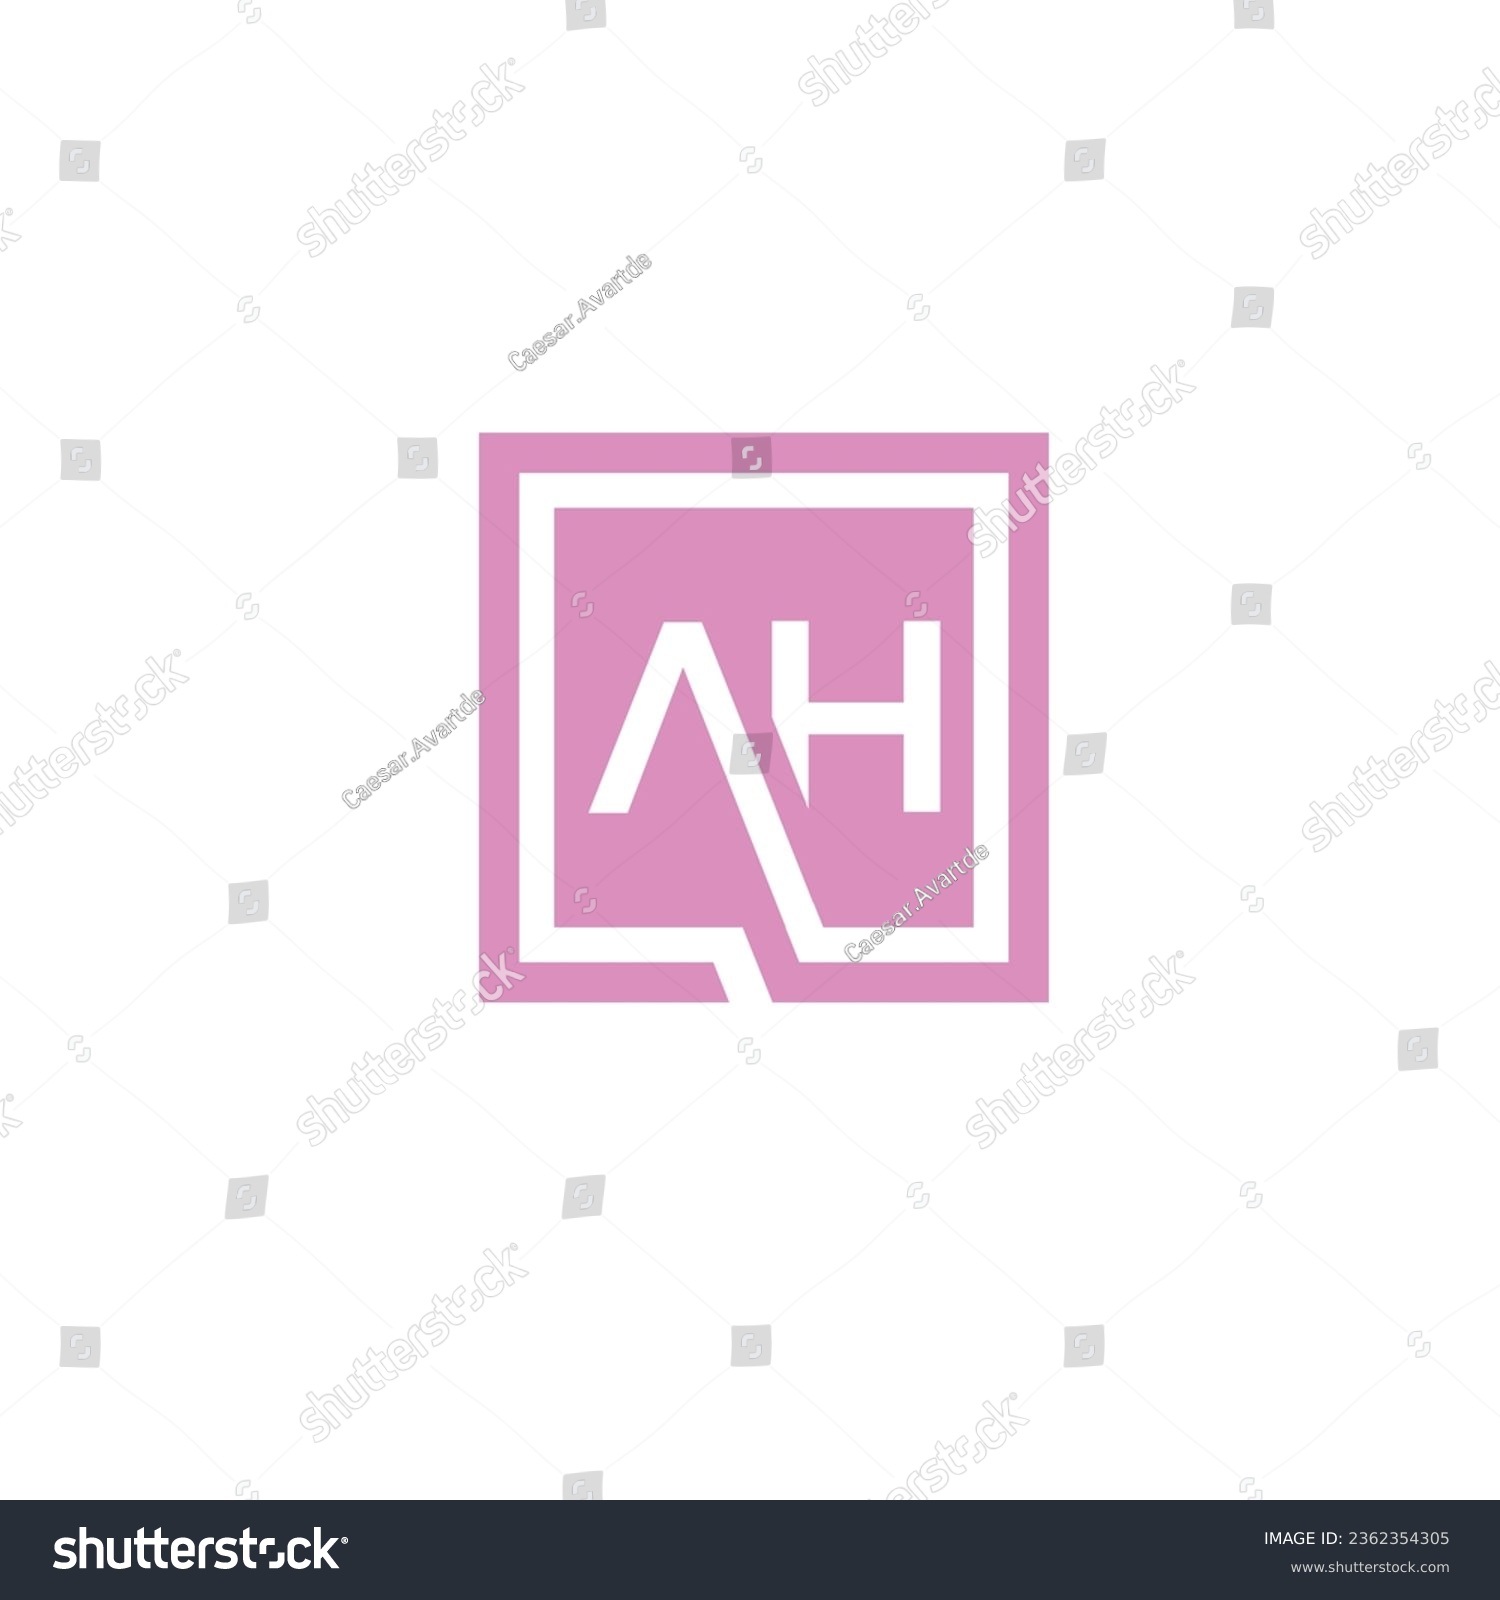 SVG of geometric square AH logo letters design concept with gold background color svg